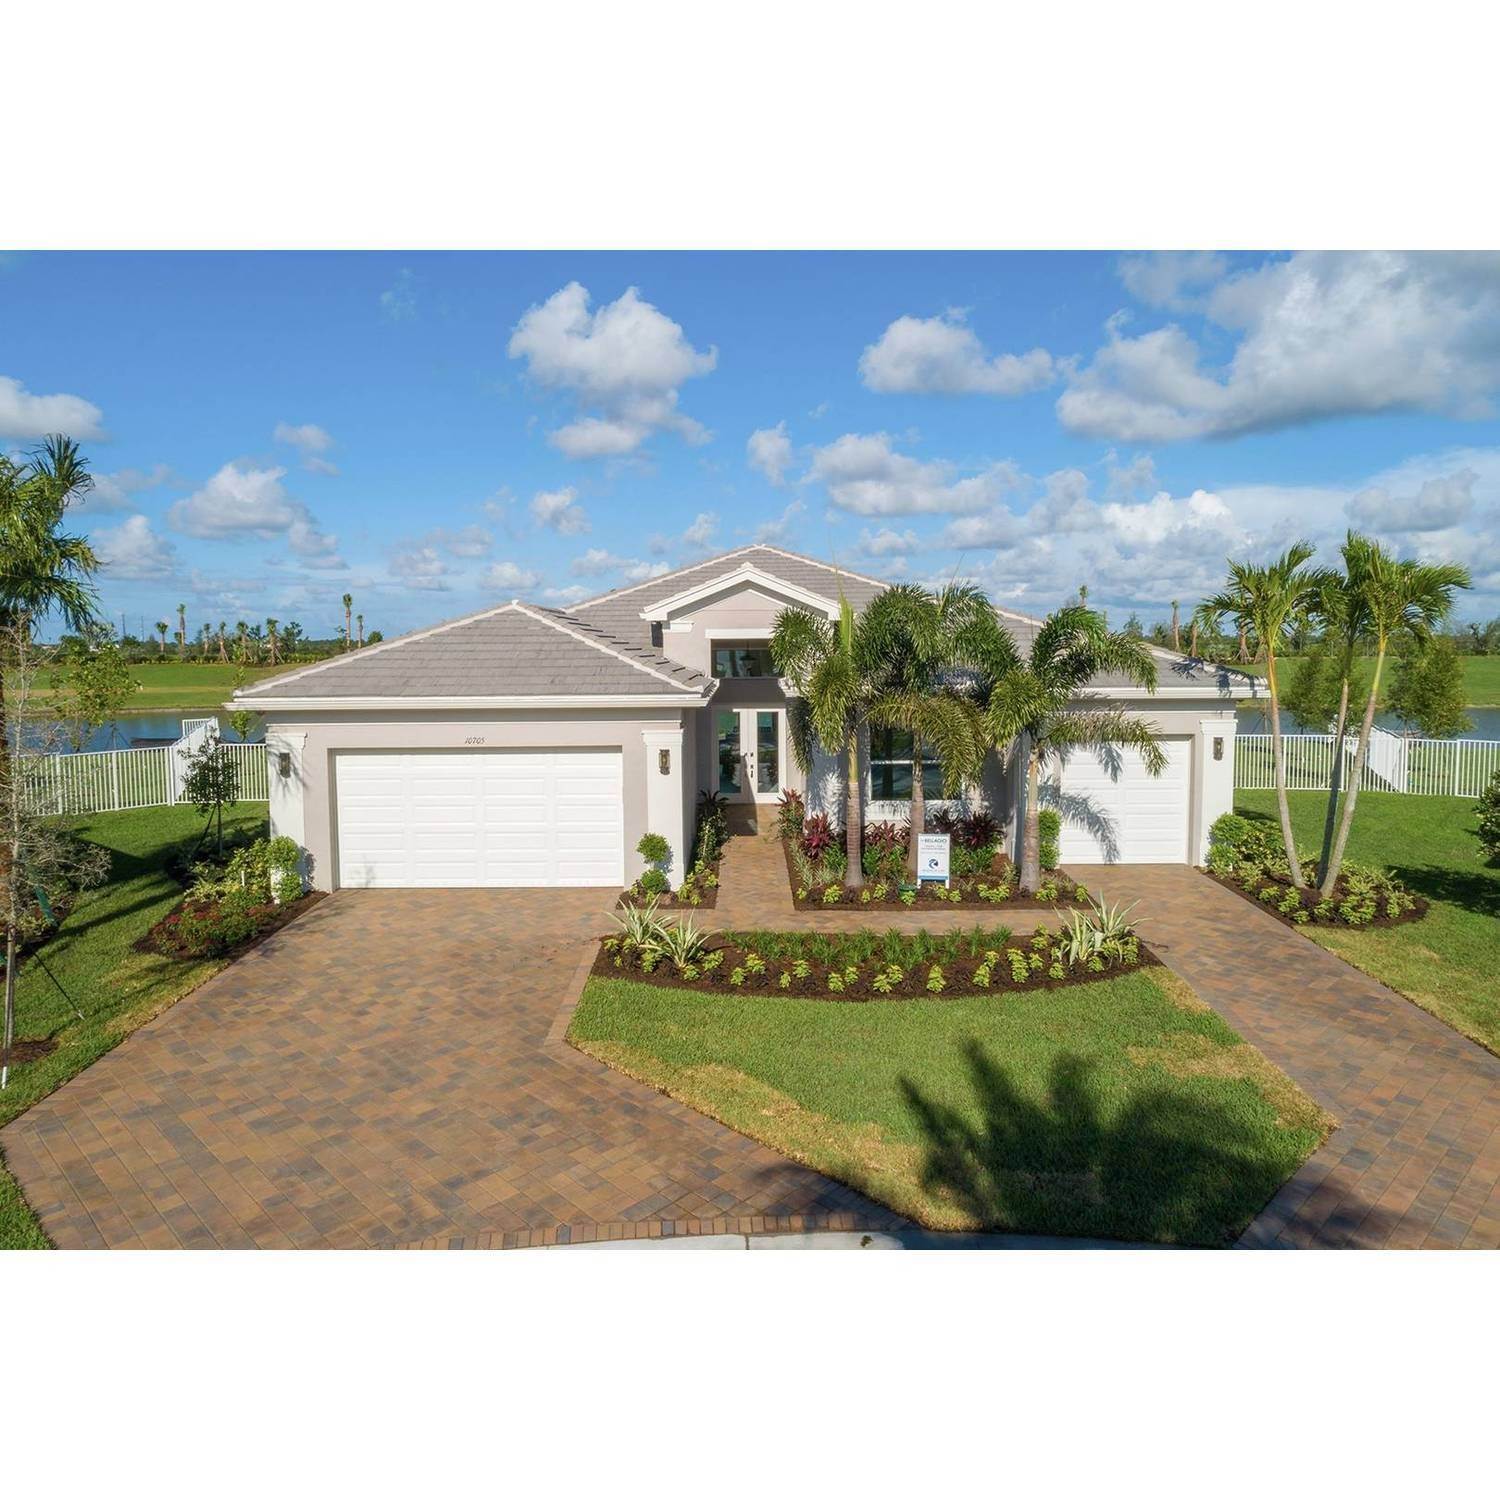 Single Family for Sale at Valencia Grove At Riverland® - Bellagio 10735 Sw Matisse Lane PORT ST. LUCIE, FLORIDA 34987 UNITED STATES